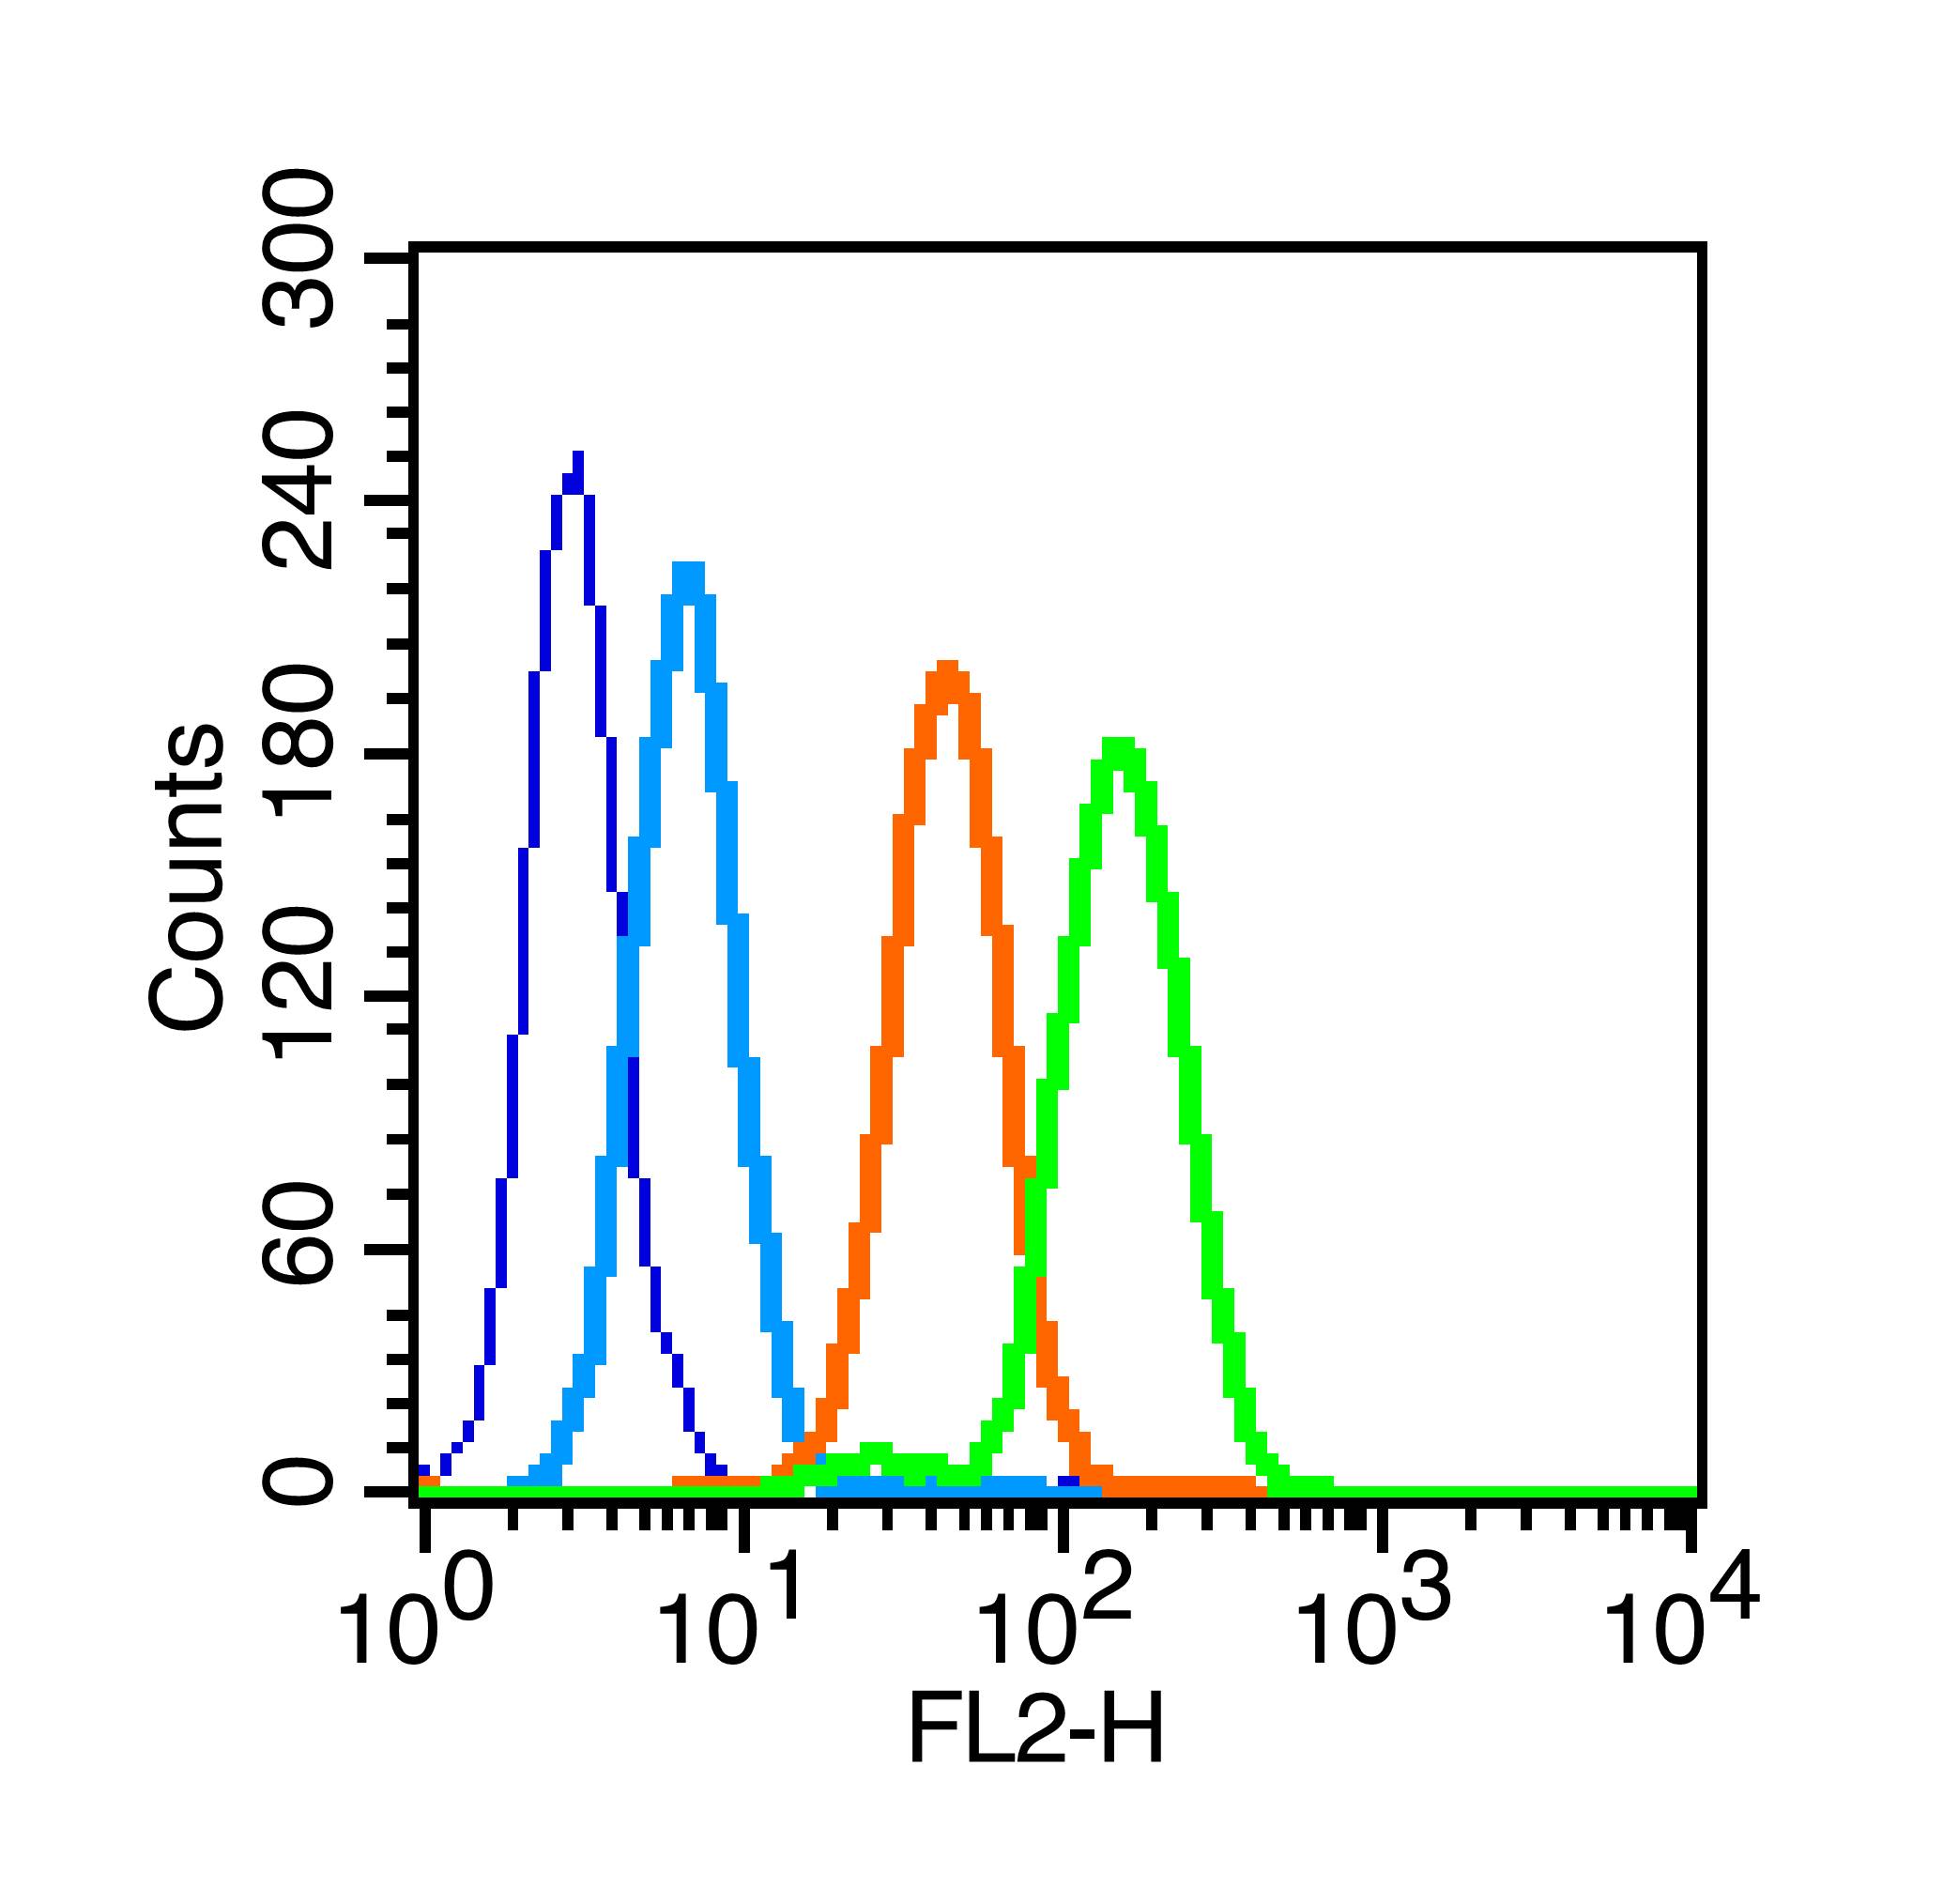 MCF-7 cells were fixed with 70% methanol (Overnight at 4\u2103). The cells were then incubated in 1X PBS \/ 2% BSA \/ 10% goat serum to block non-specific protein-protein interactions for 15 min at room temperature. Primary incubation with IL-1R1 (Tyr496) Polyclonal Antibody, Unconjugated (bs-5349R) at 1:100 (1\u03bcg \/10^6 cells) for 30 minutes at room temp. A PE-conjugated secondary antibody (bs-0295G-PE) was used for 40 min at room temperature. The graph compares the primary antibody (green) to unstained cells (dark blue), secondary only (light blue), and isotype control (bs-0295P; orange).